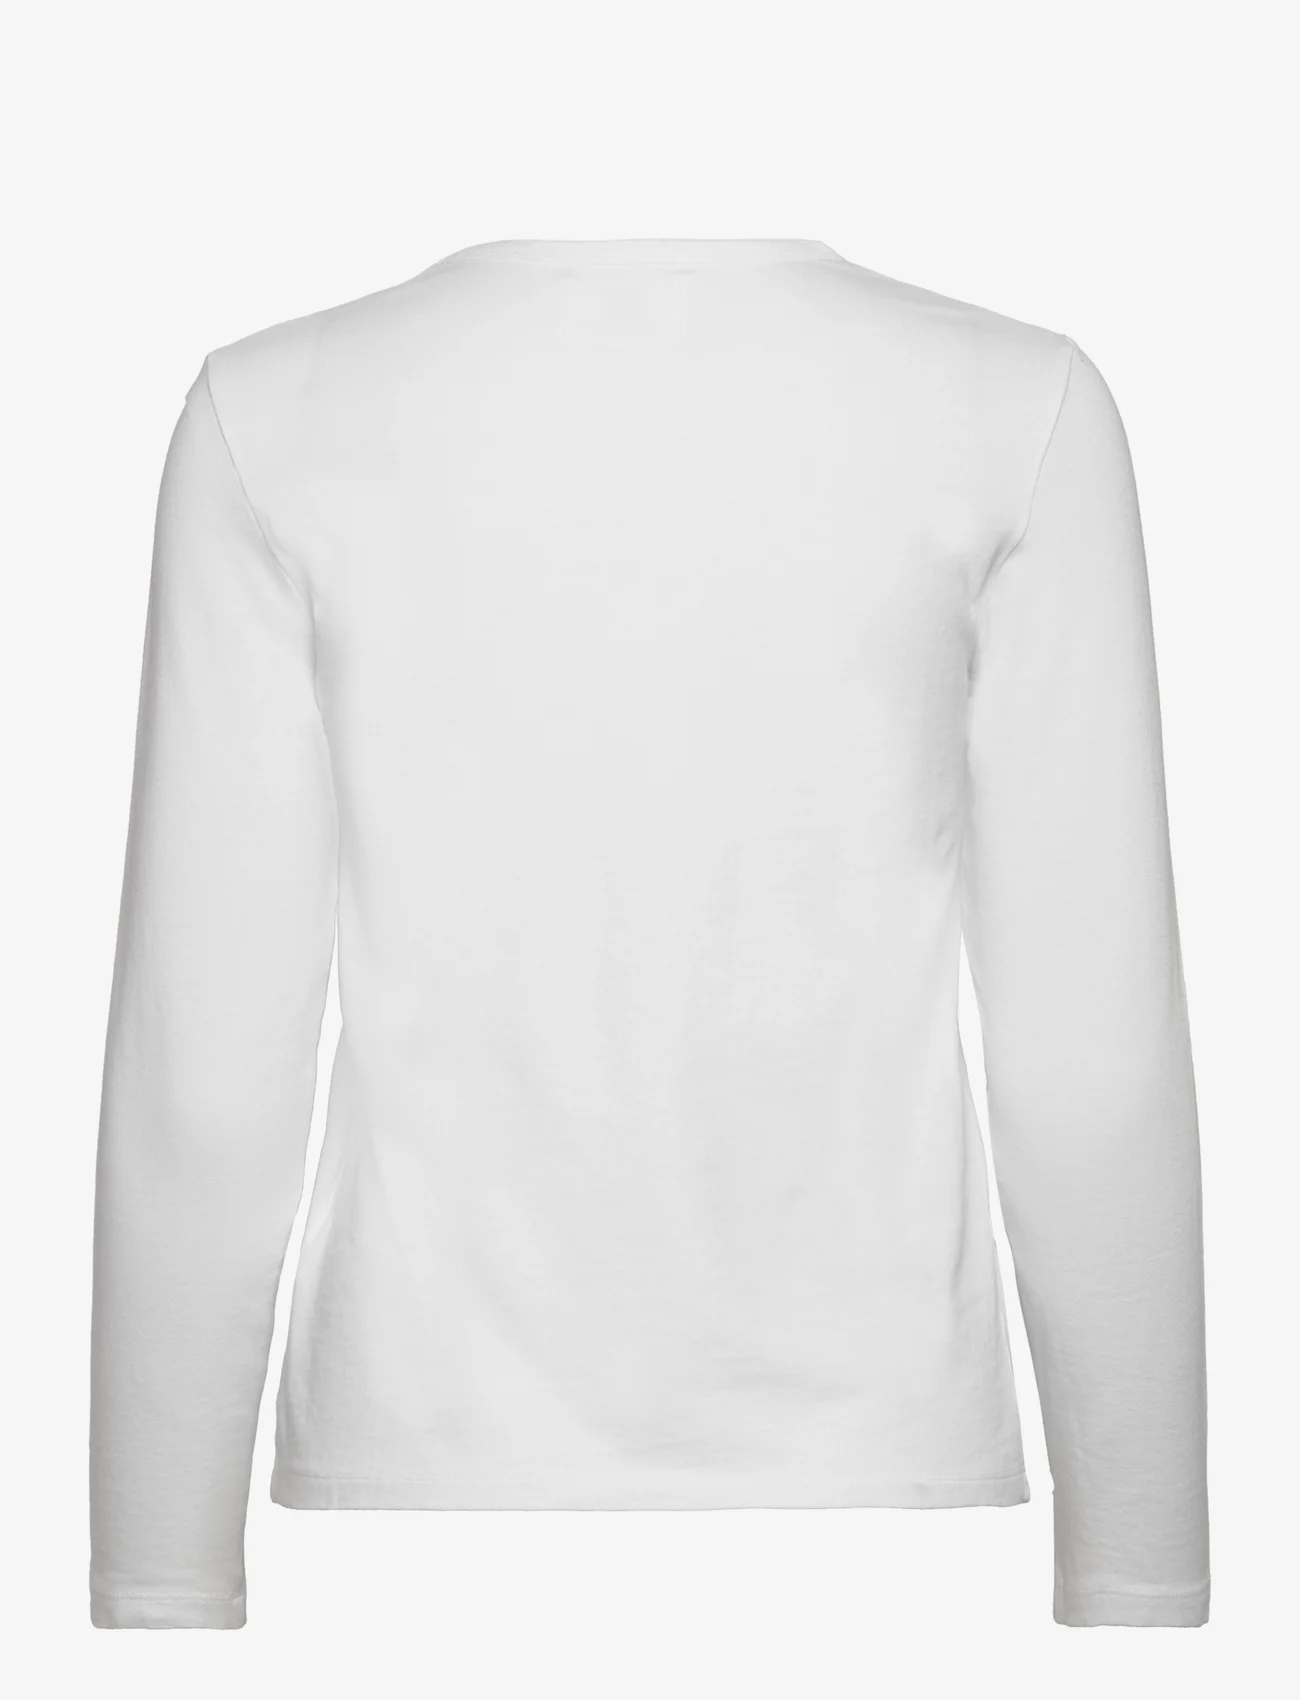 Double A by Wood Wood - Moa long sleeve GOTS - langærmede toppe - bright white - 1